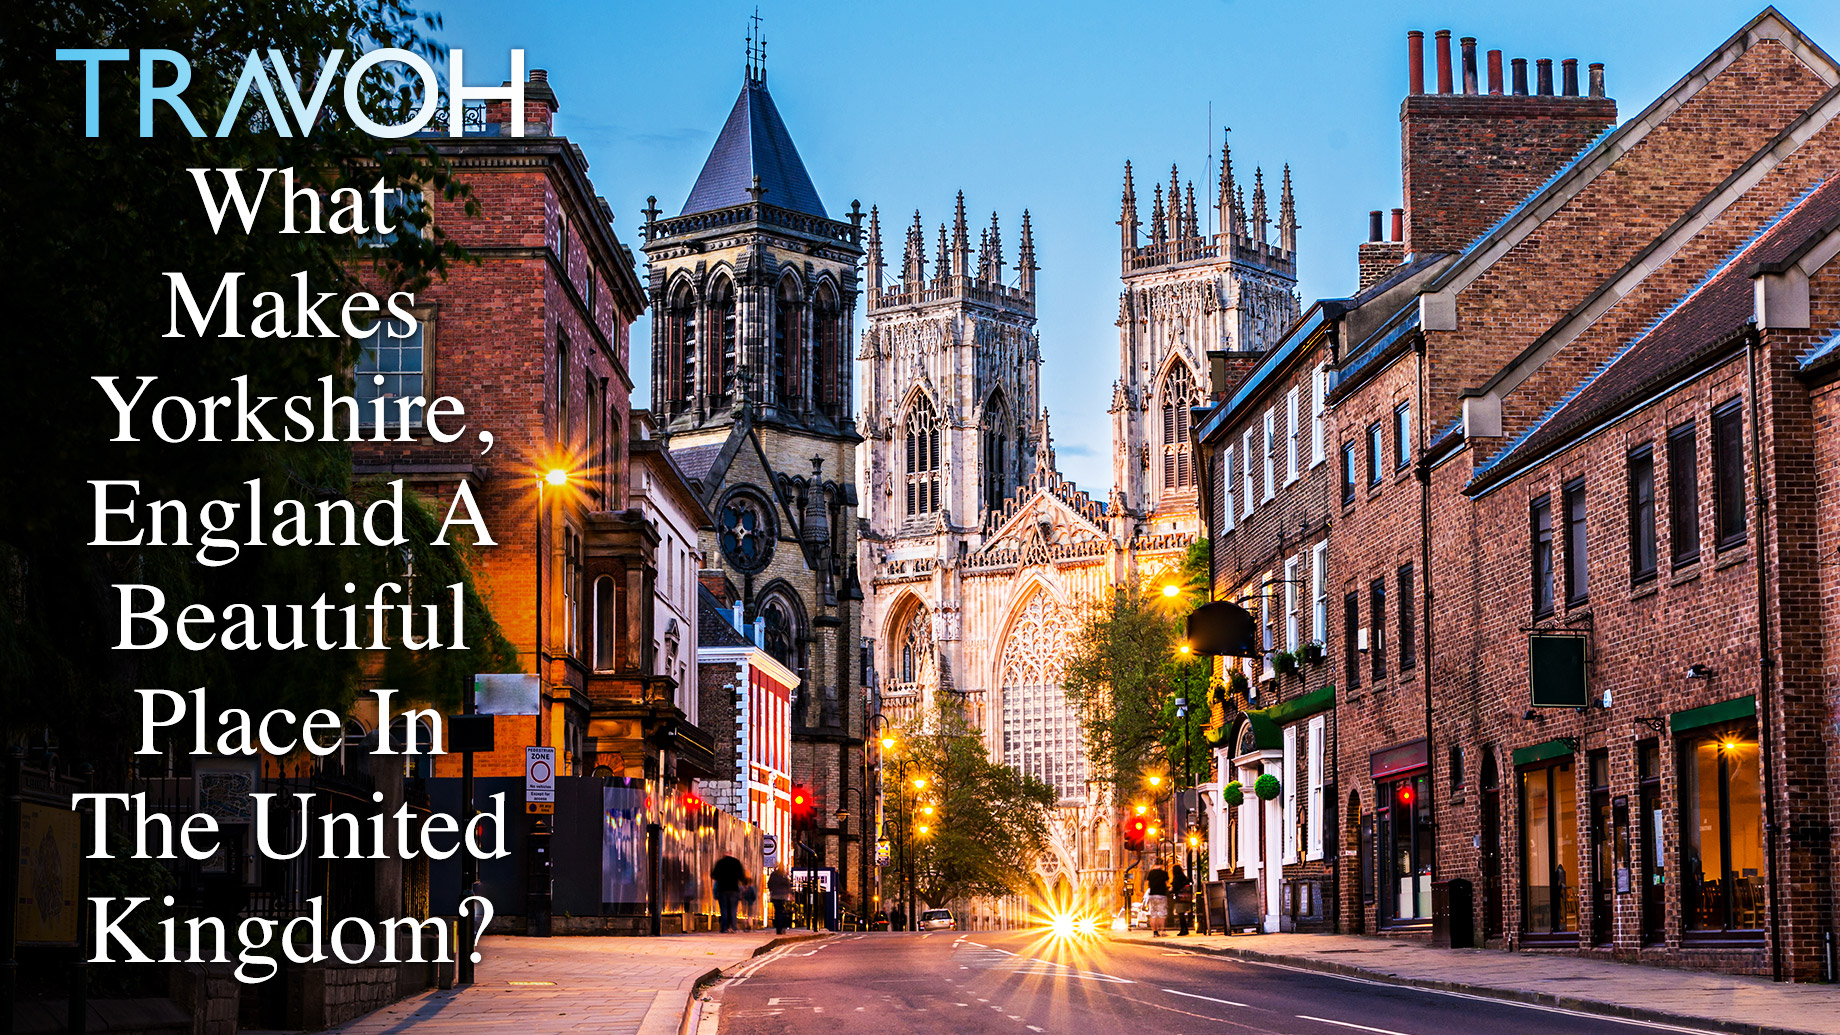 What Makes Yorkshire, England A Beautiful Place In The United Kingdom?